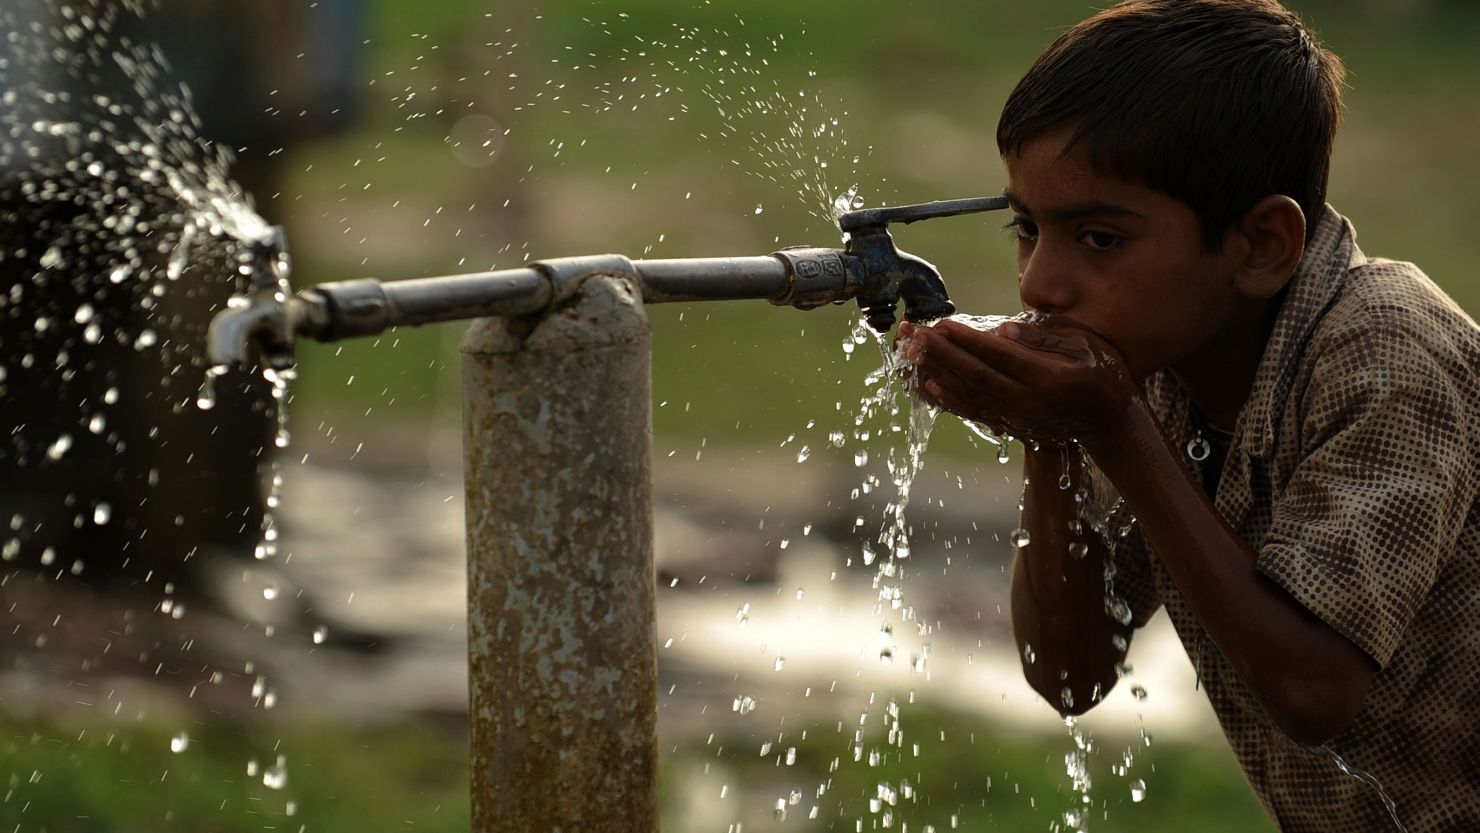 WaterAid has produced an interactive for World Water Day showing the 'transformative impact' of clean water provision. 